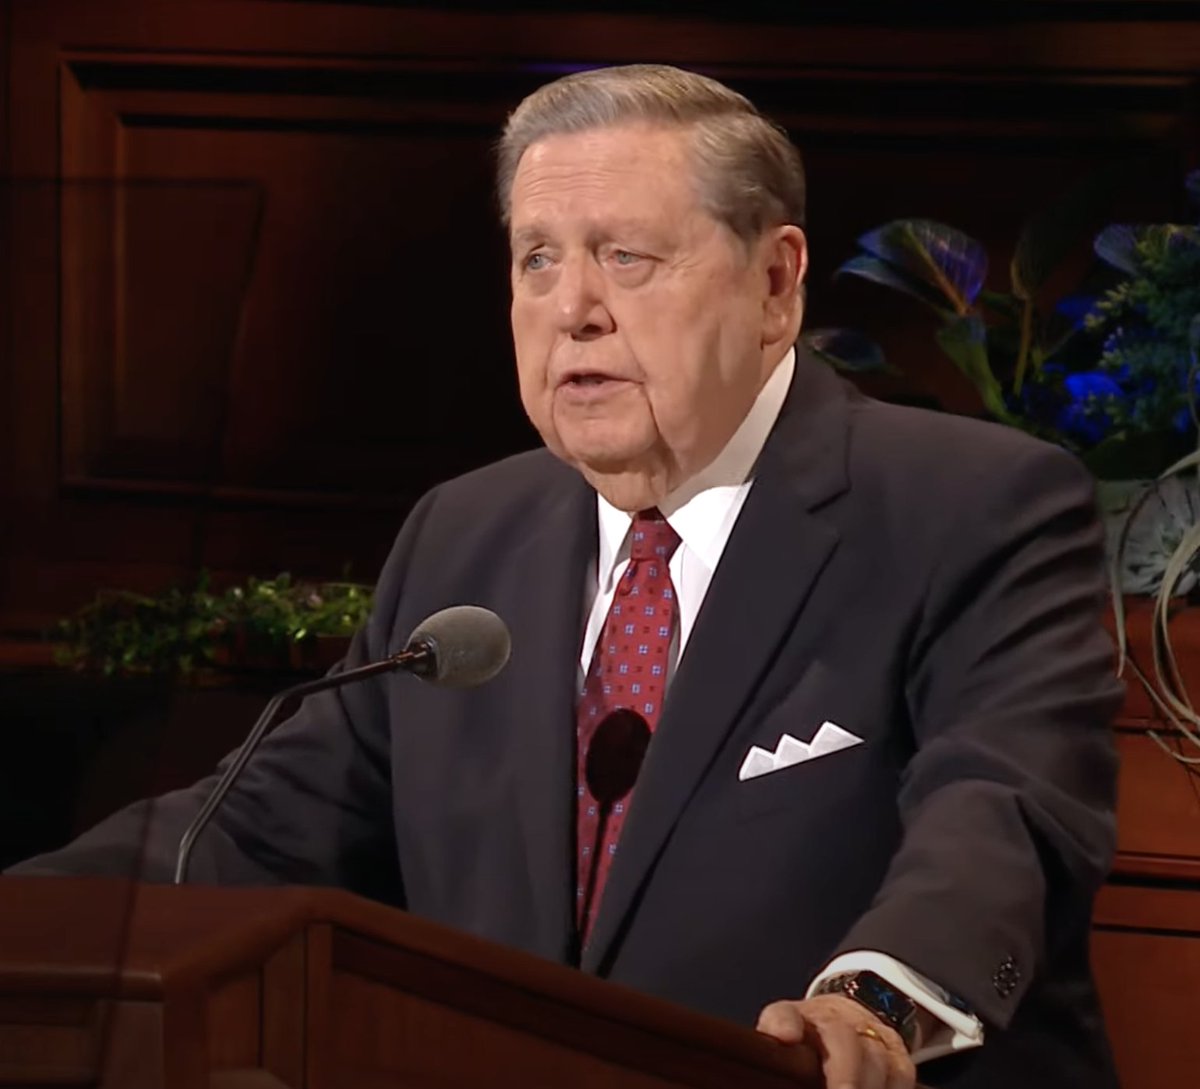 “As we take up our crosses and follow him, it would be tragic indeed if the weight of our challenges did not make us more empathetic for and attentive to the burdens being carried by others.” @HollandJeffreyR | #GeneralConference